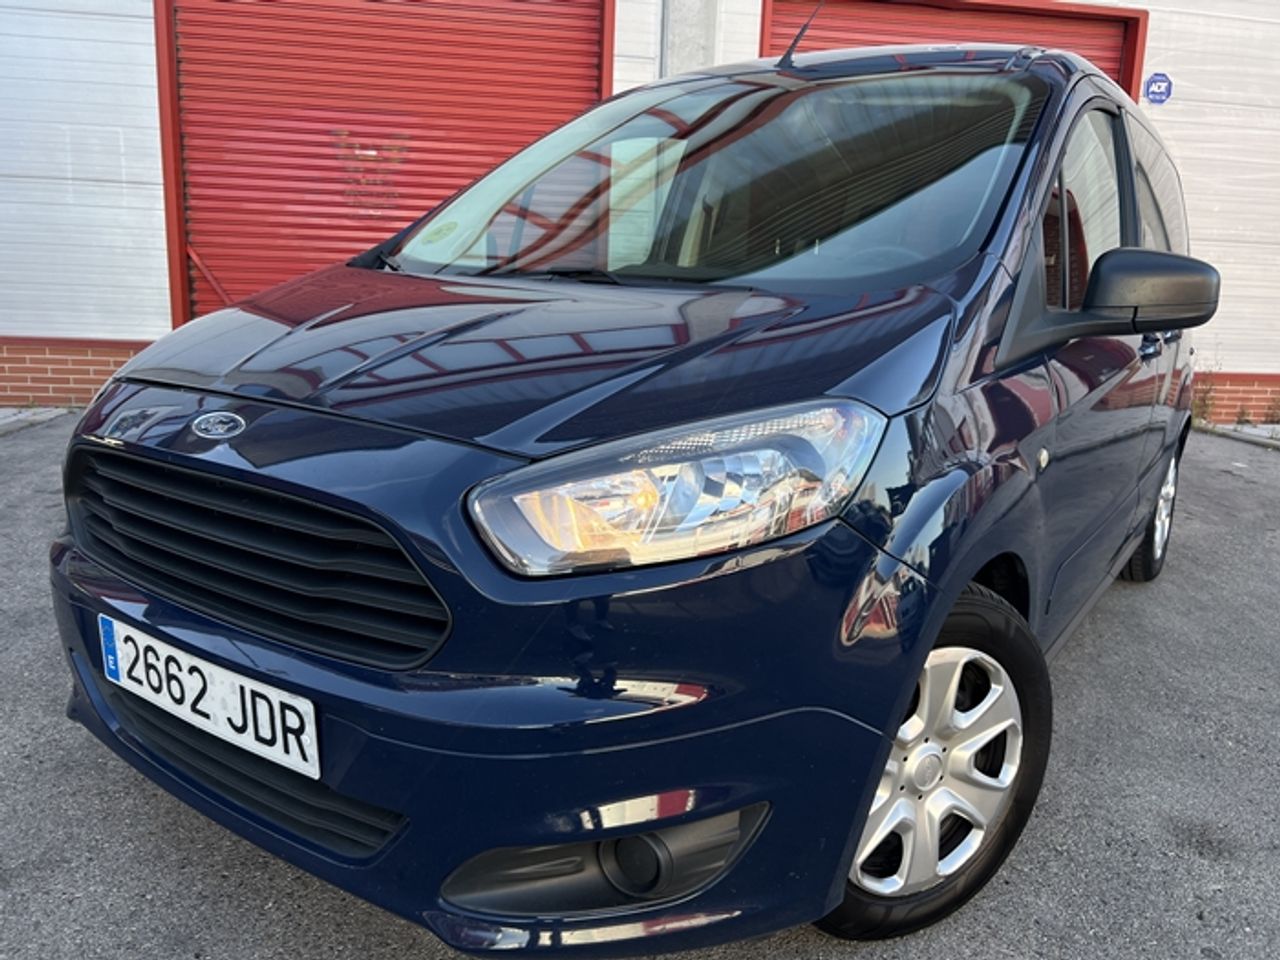 Foto Ford Tourneo Courier 14